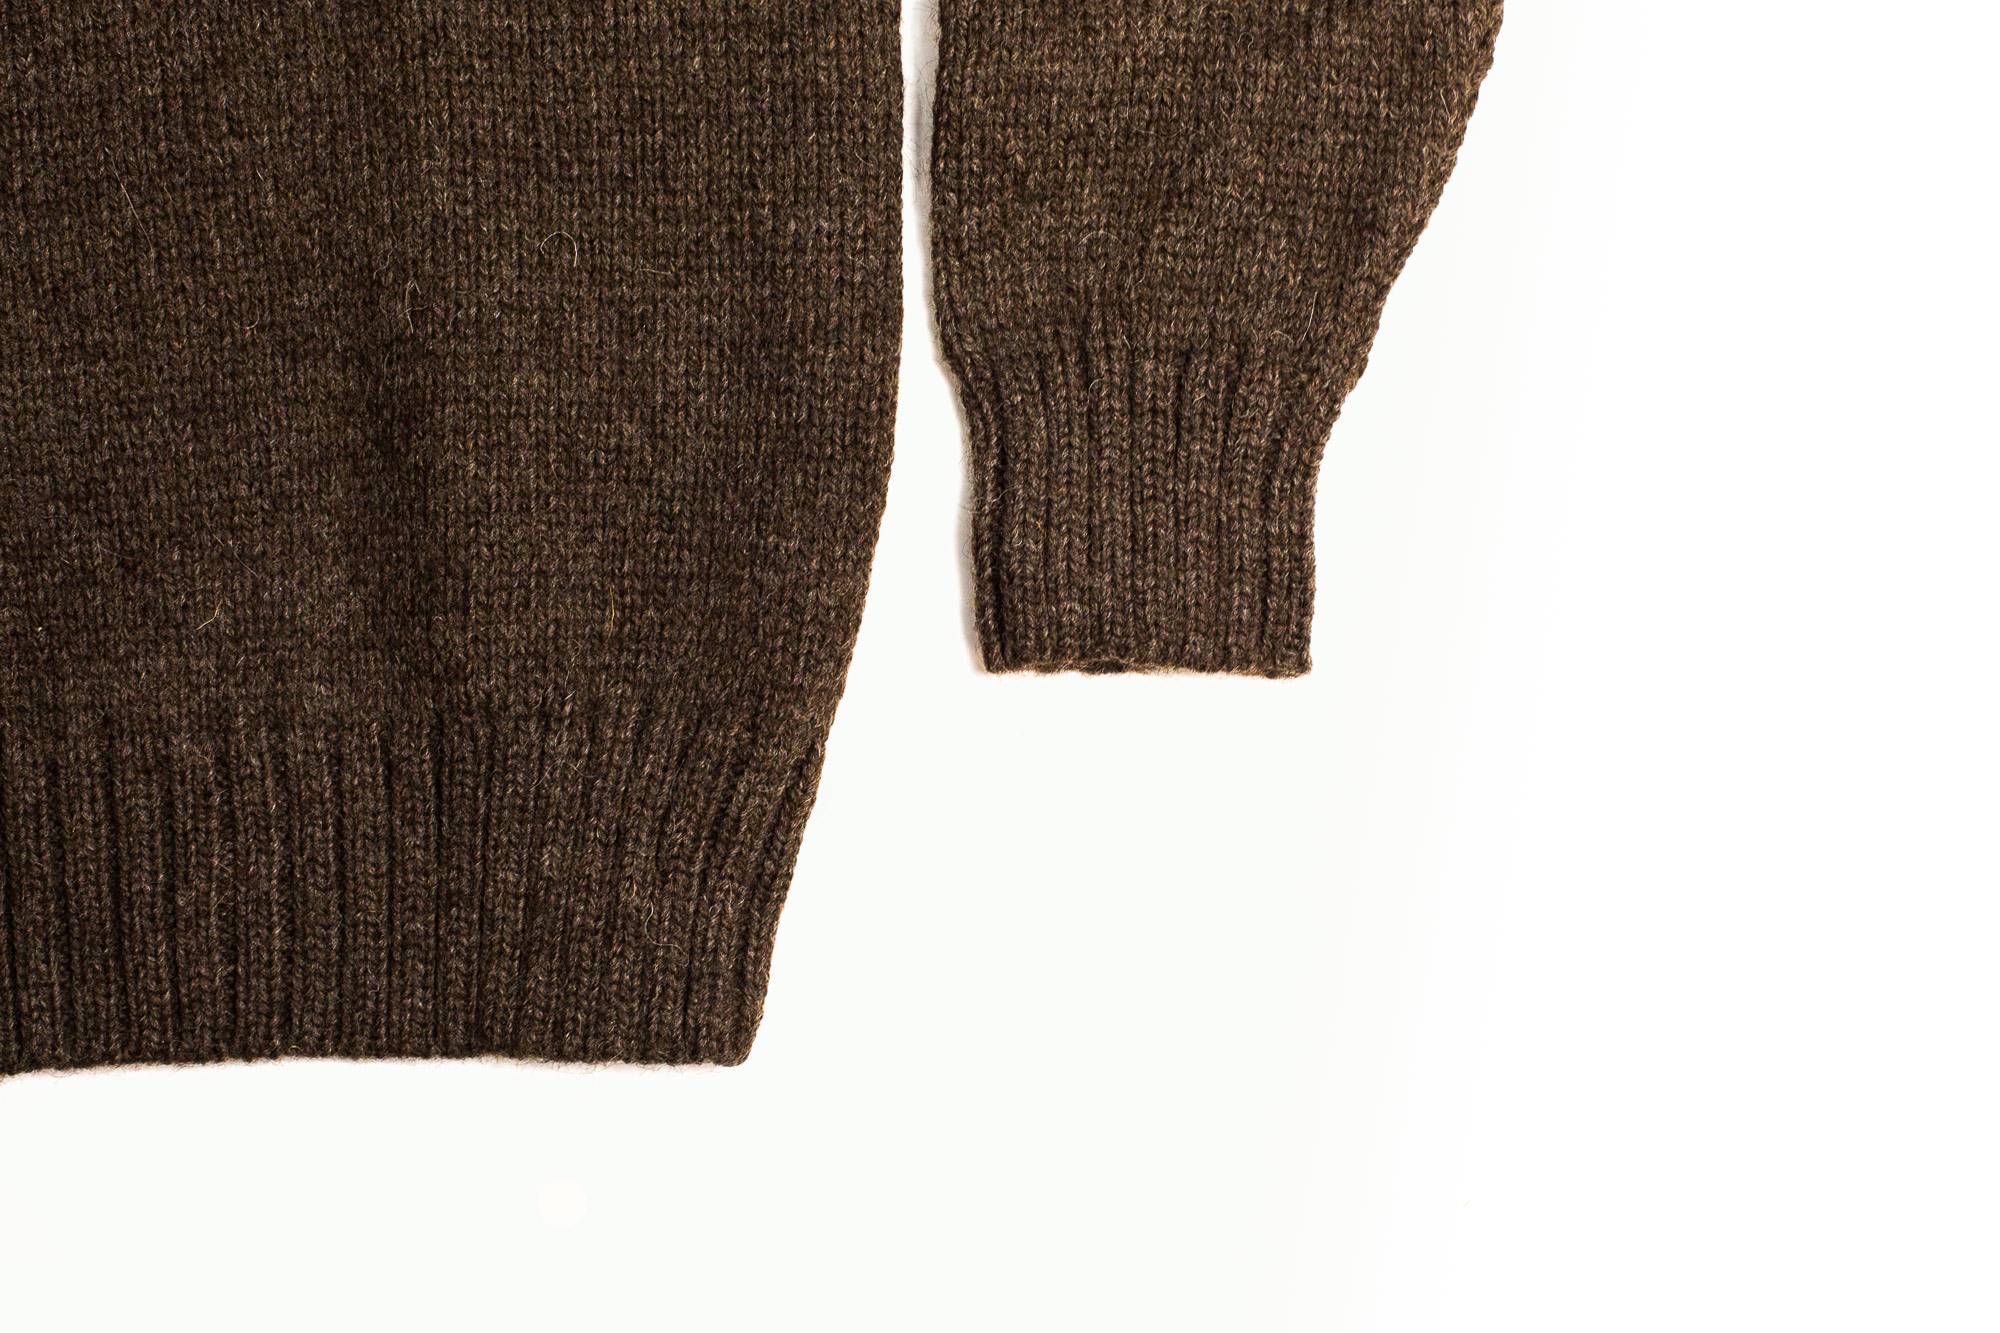 Corridor’s Highland Wool Collection Harnesses the Power of Peruvian Sheep